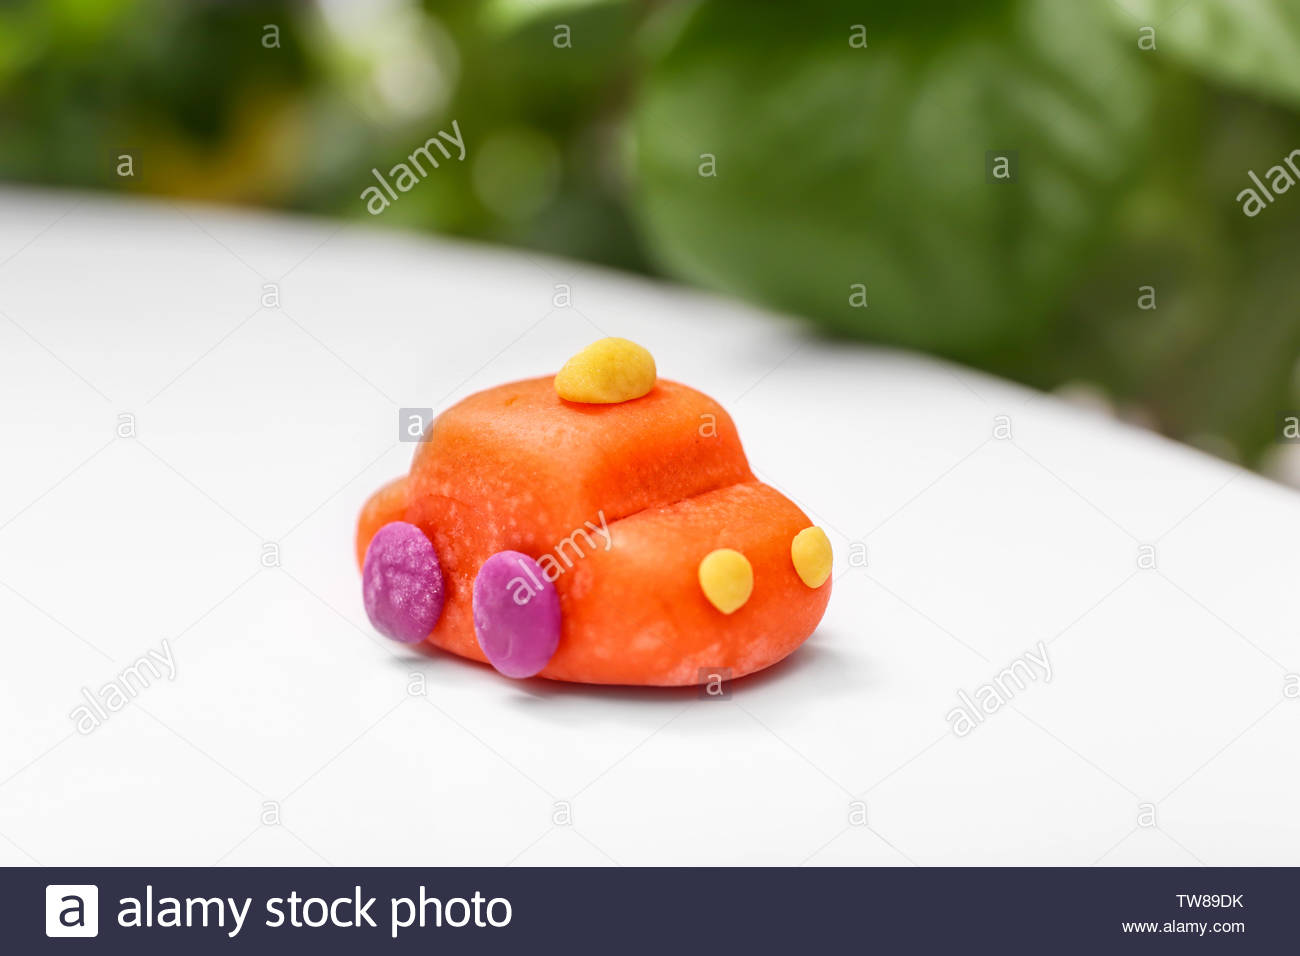 Car Made From Playdough On Table Against Blurred Background